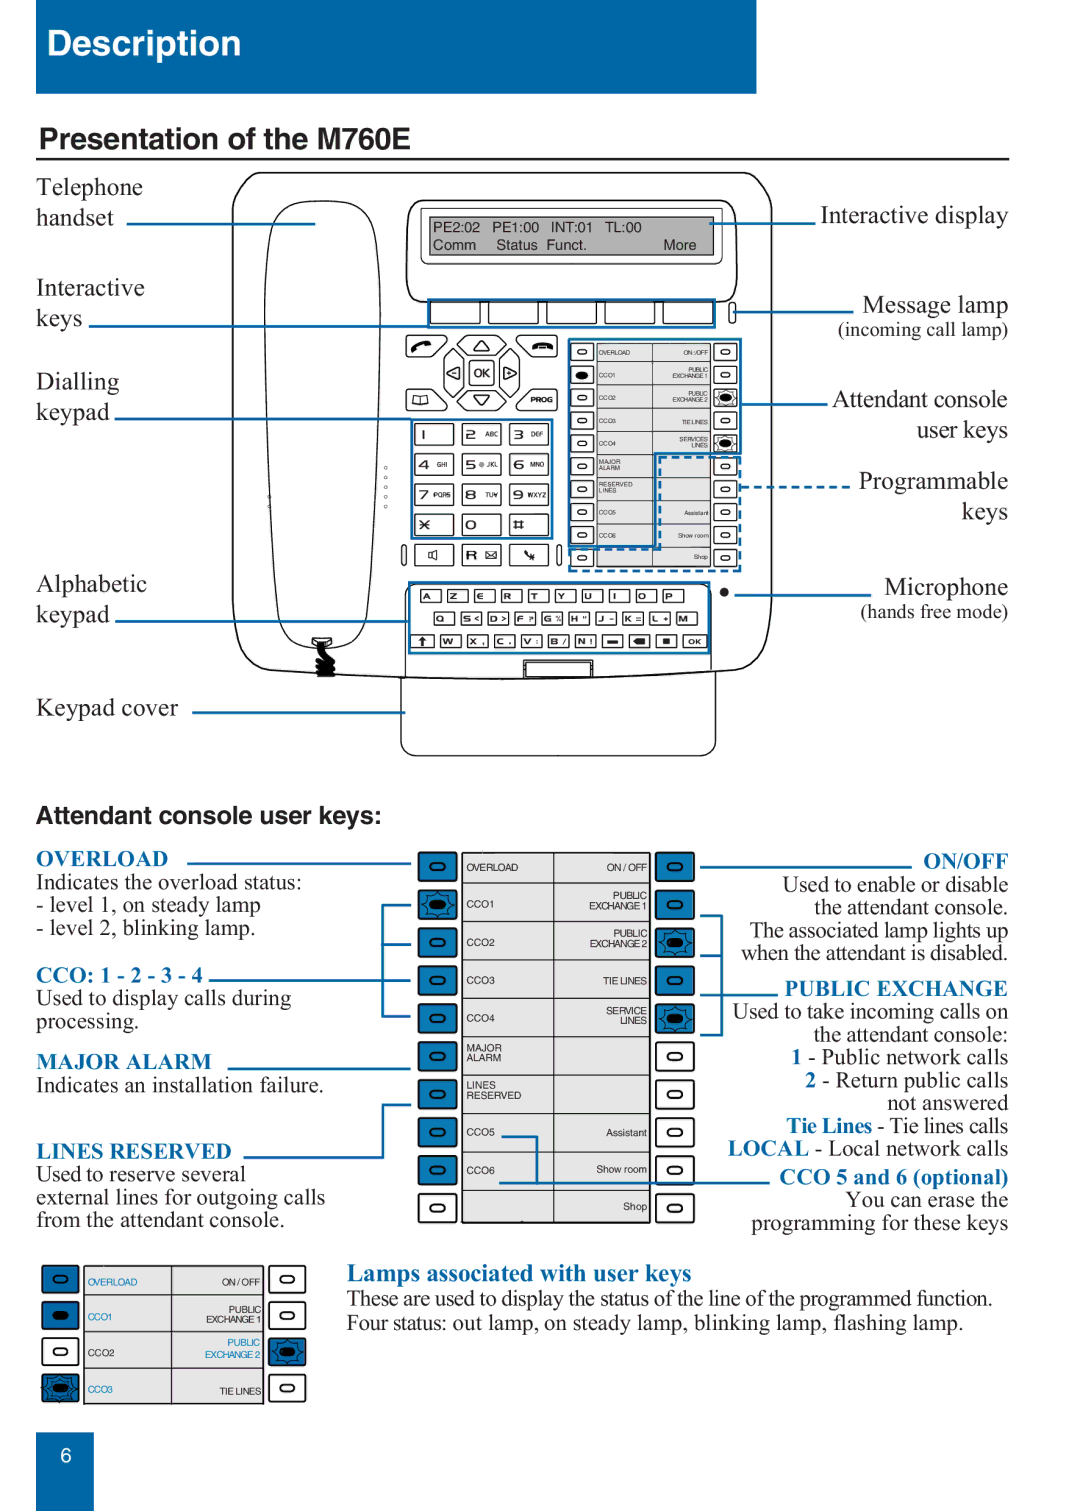 Aastra Telecom manual Presentation of the M760E, Attendant console user keys, Lamps associated with user keys 